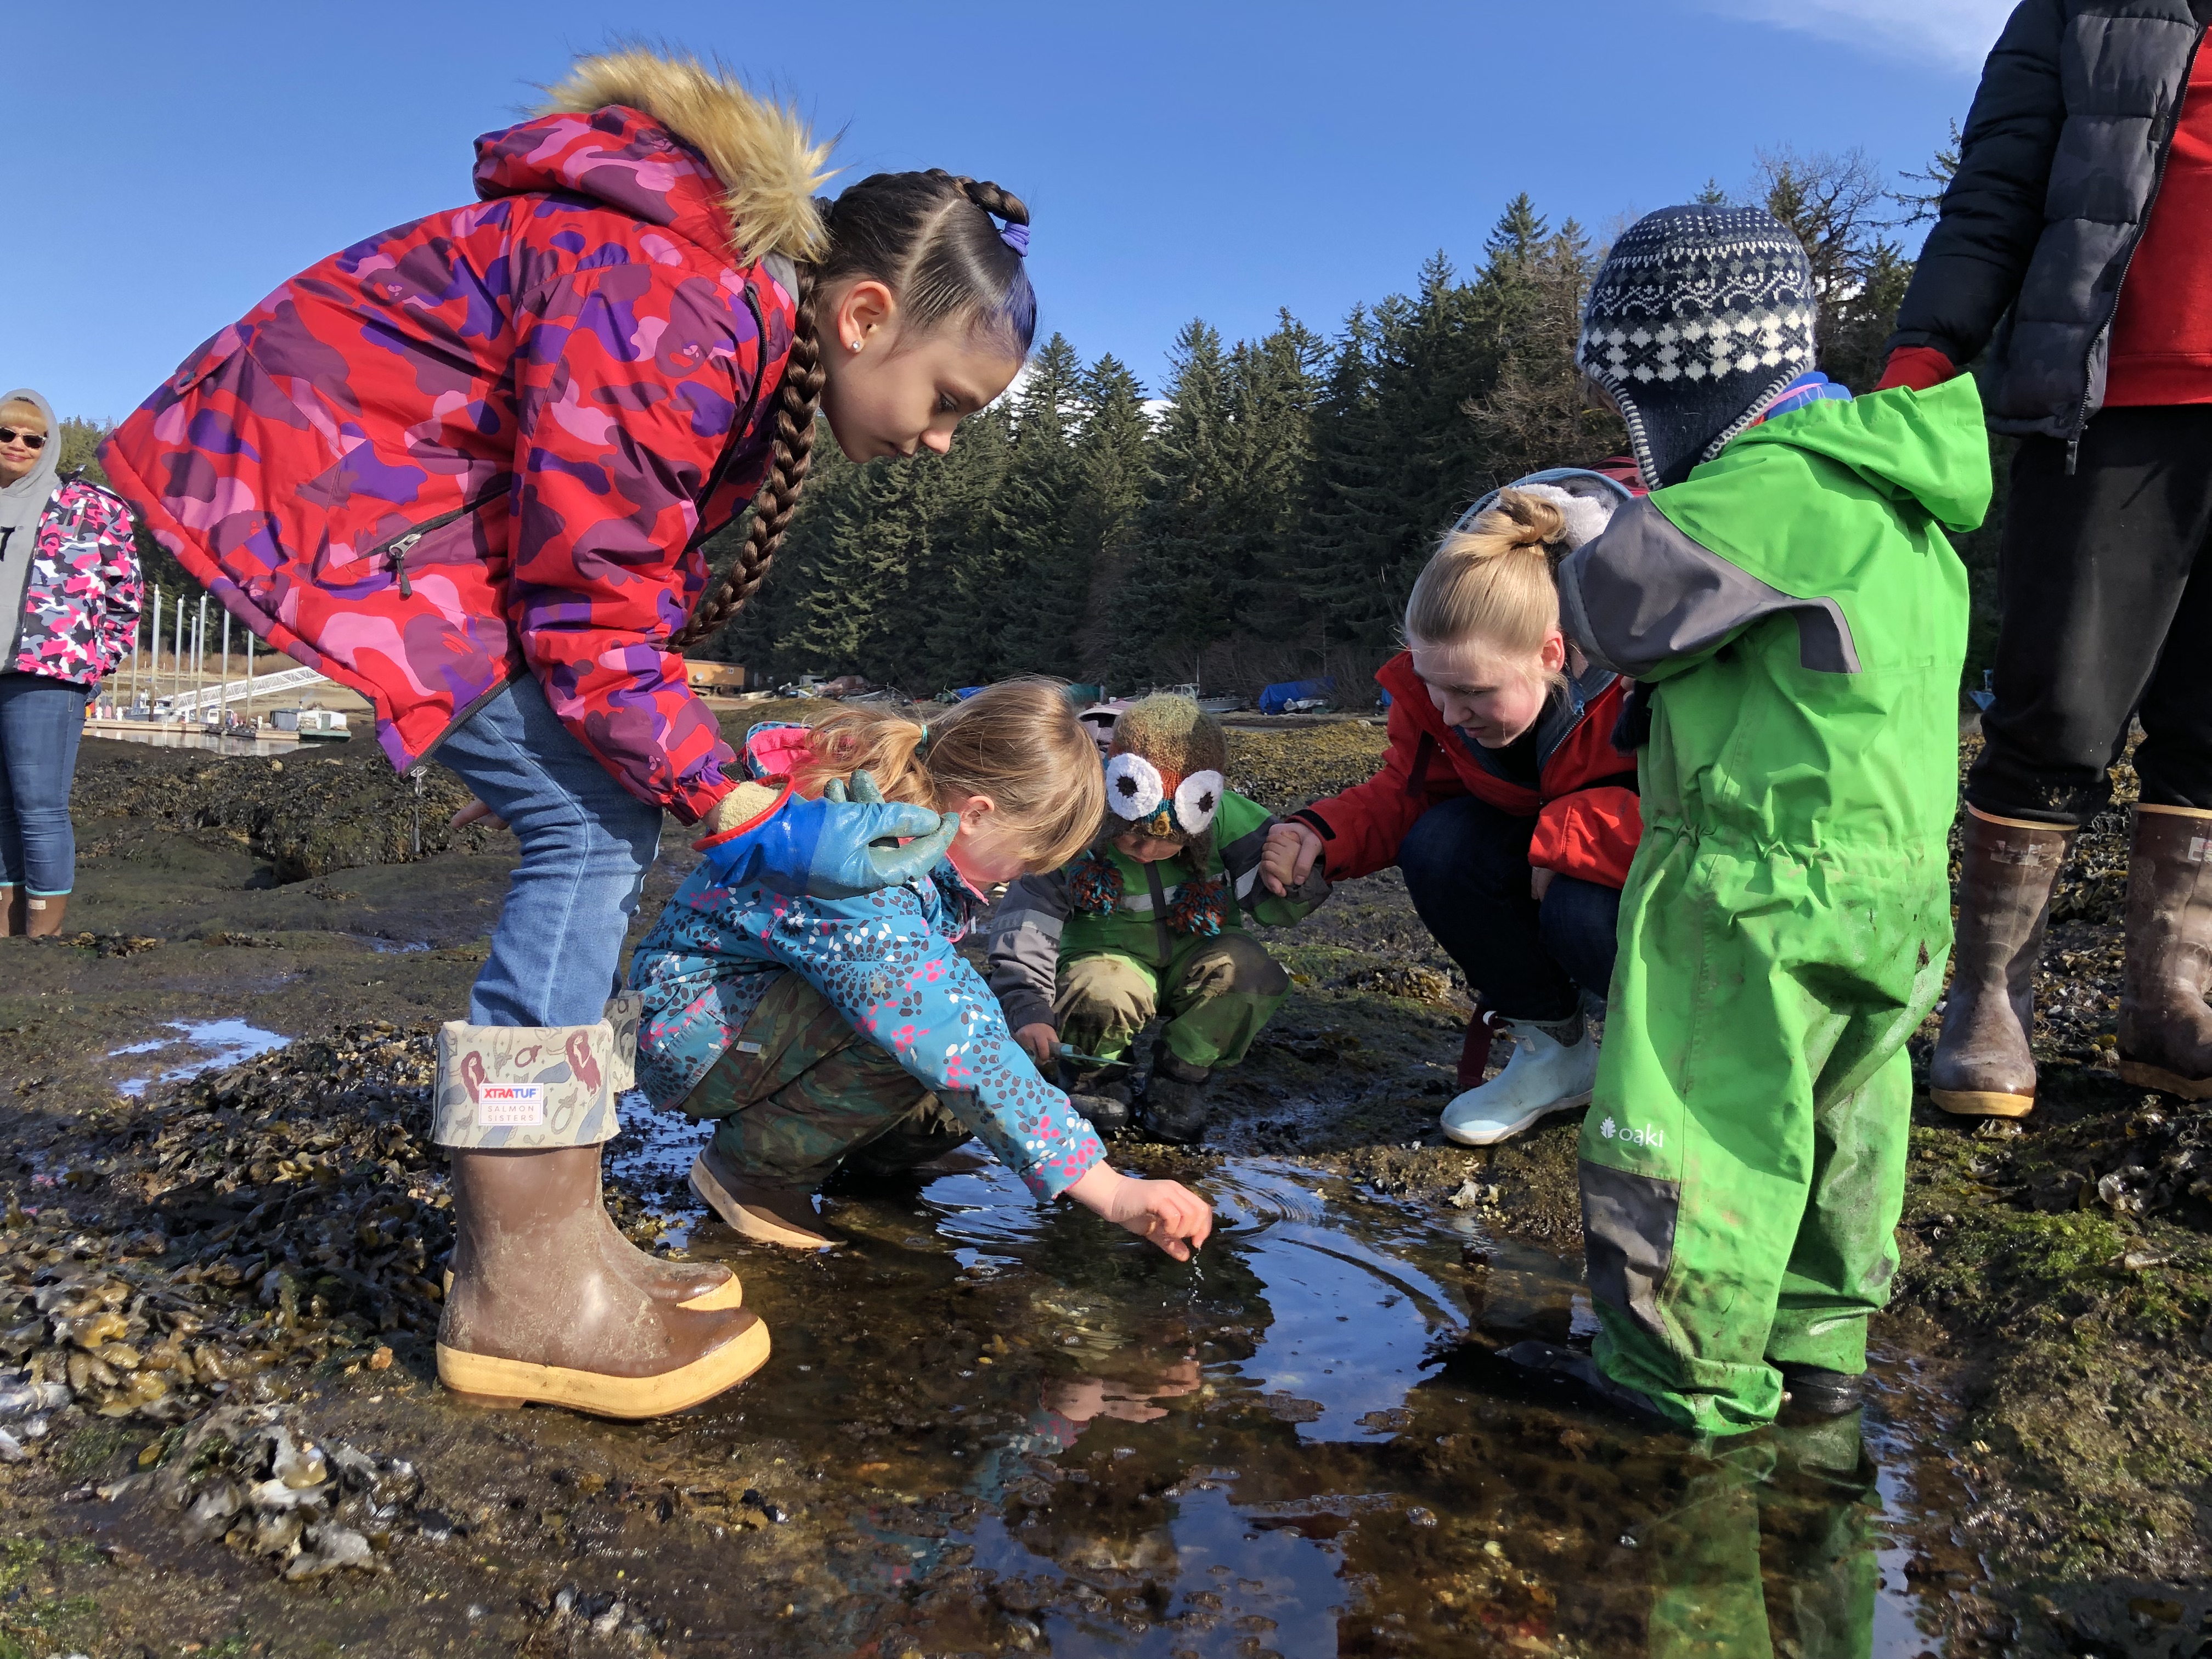 Elementary students gathered around a tide pool on the beach